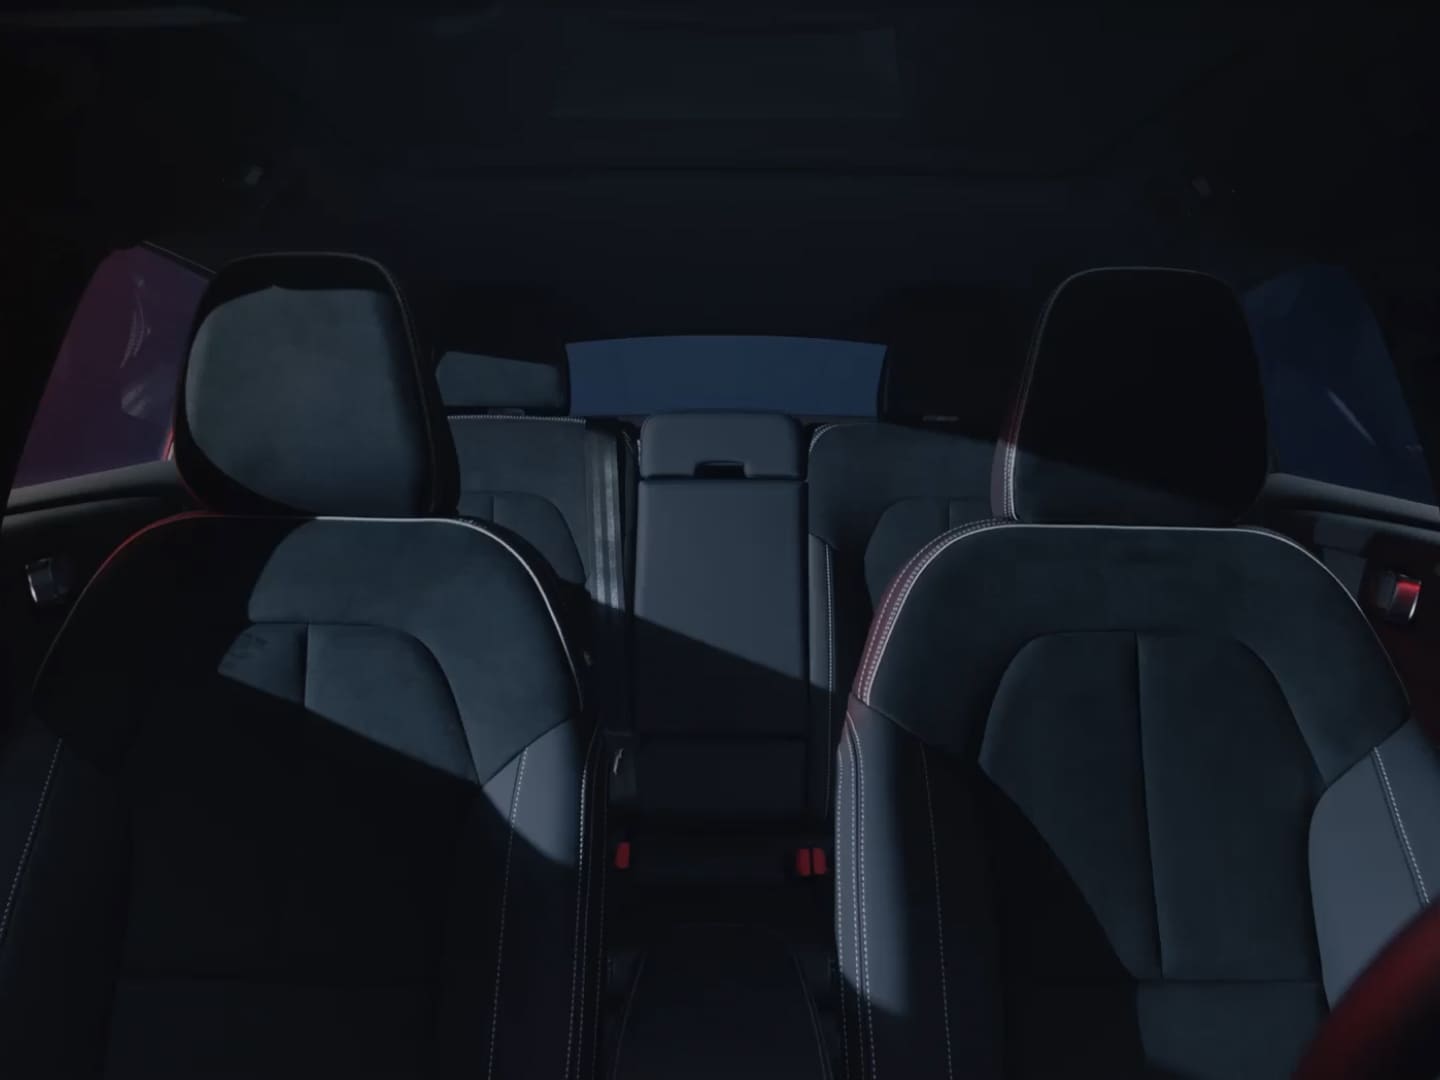 Overview of the interior design of the Volvo C40.